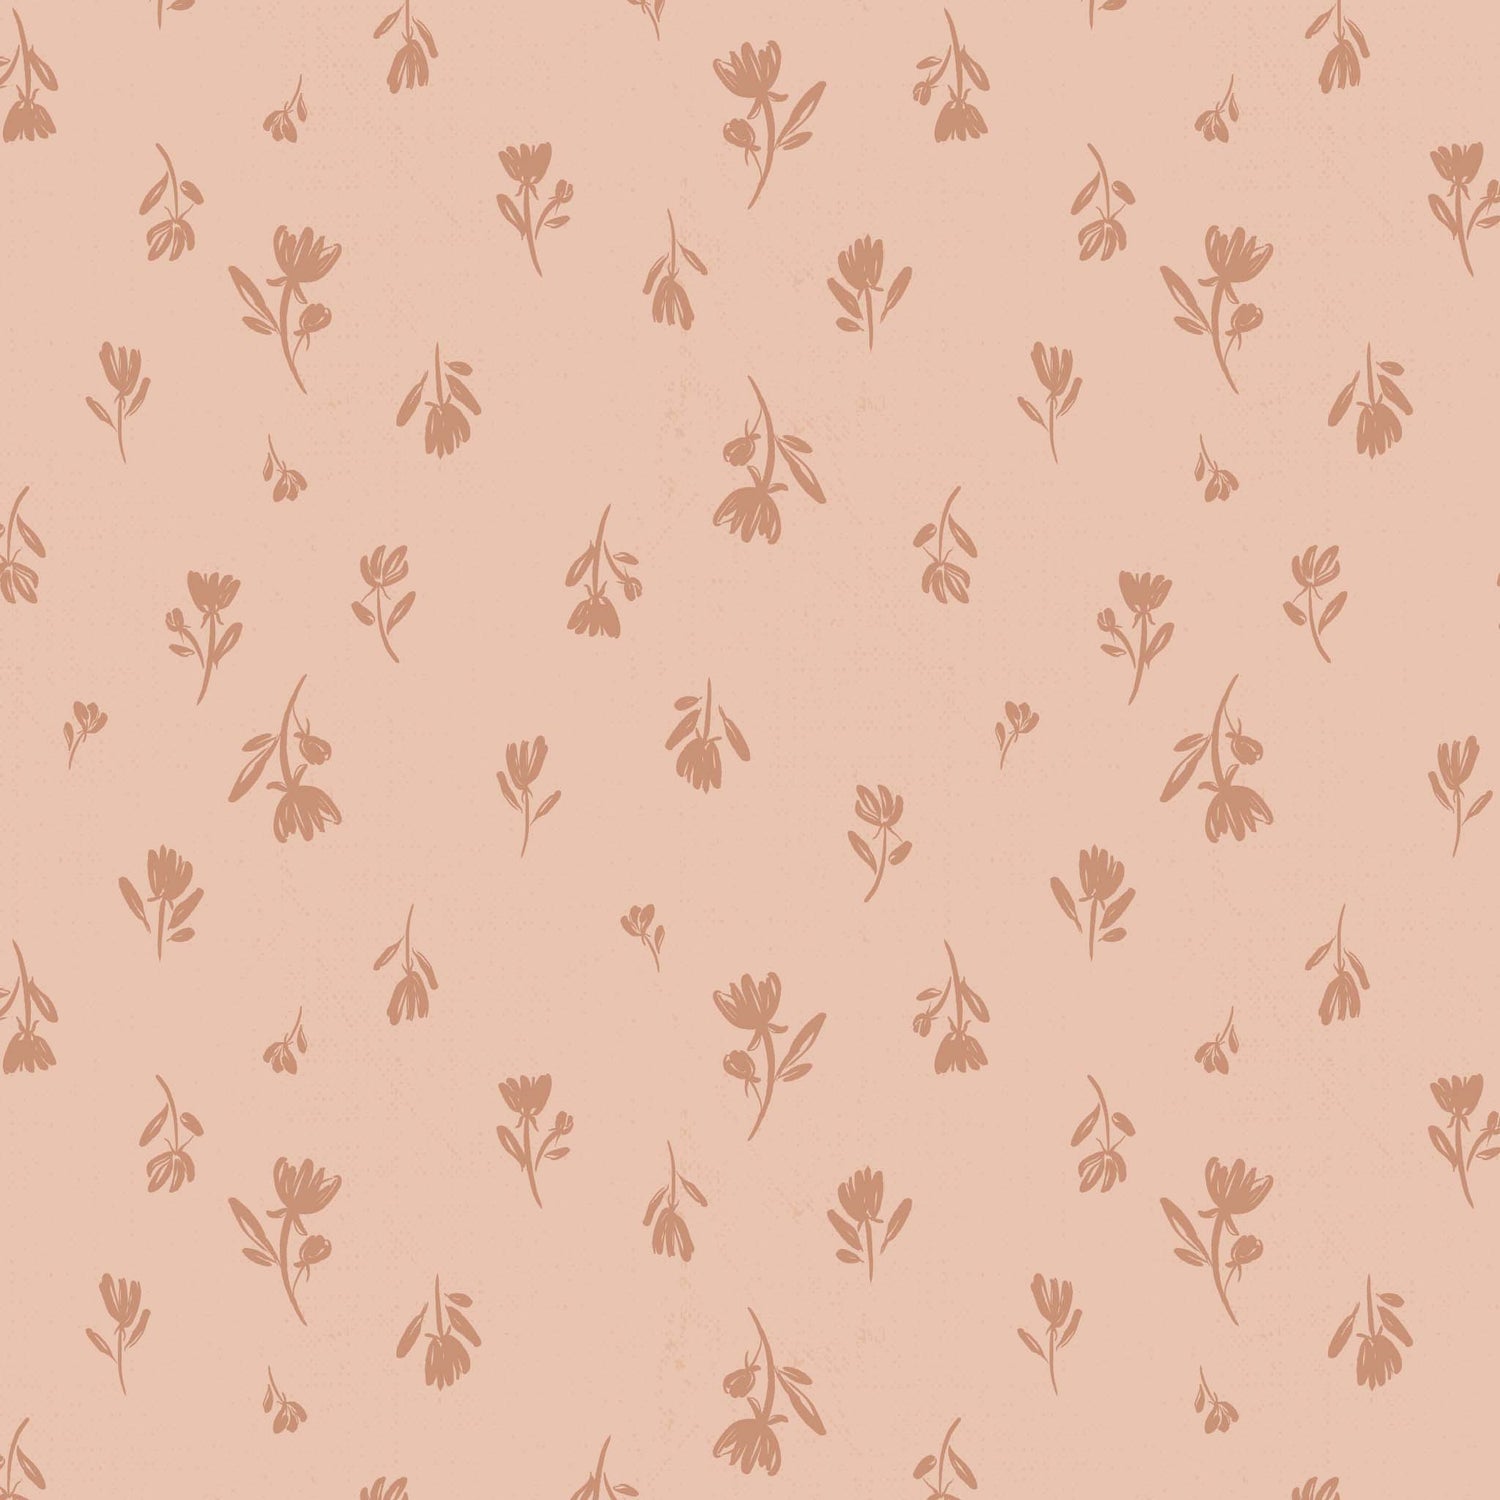 Close up featuring Cayla Naylor Annette-Blush Peel and Stick Wallpaper - a floral pattern